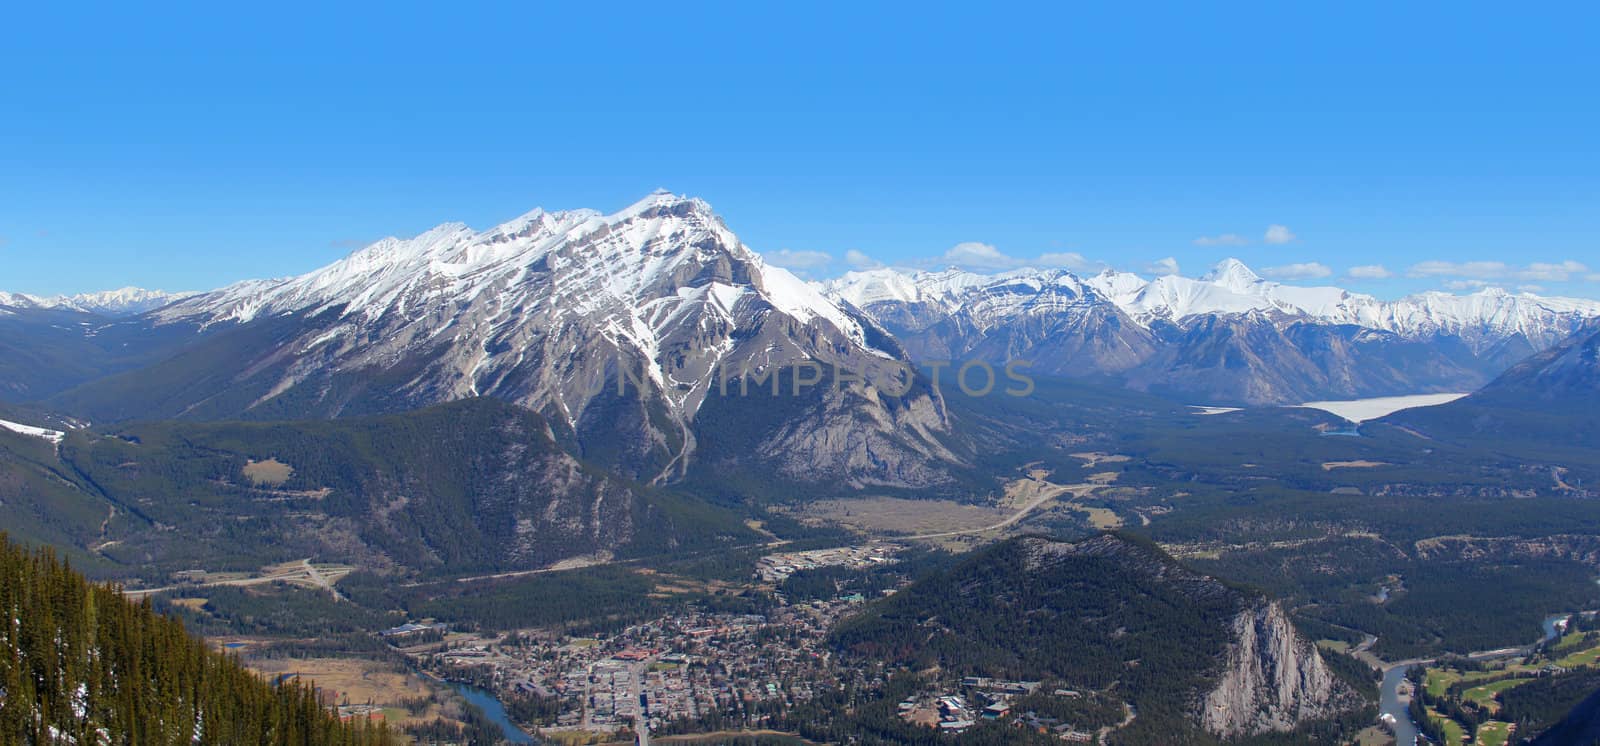 Banff Town by vanell